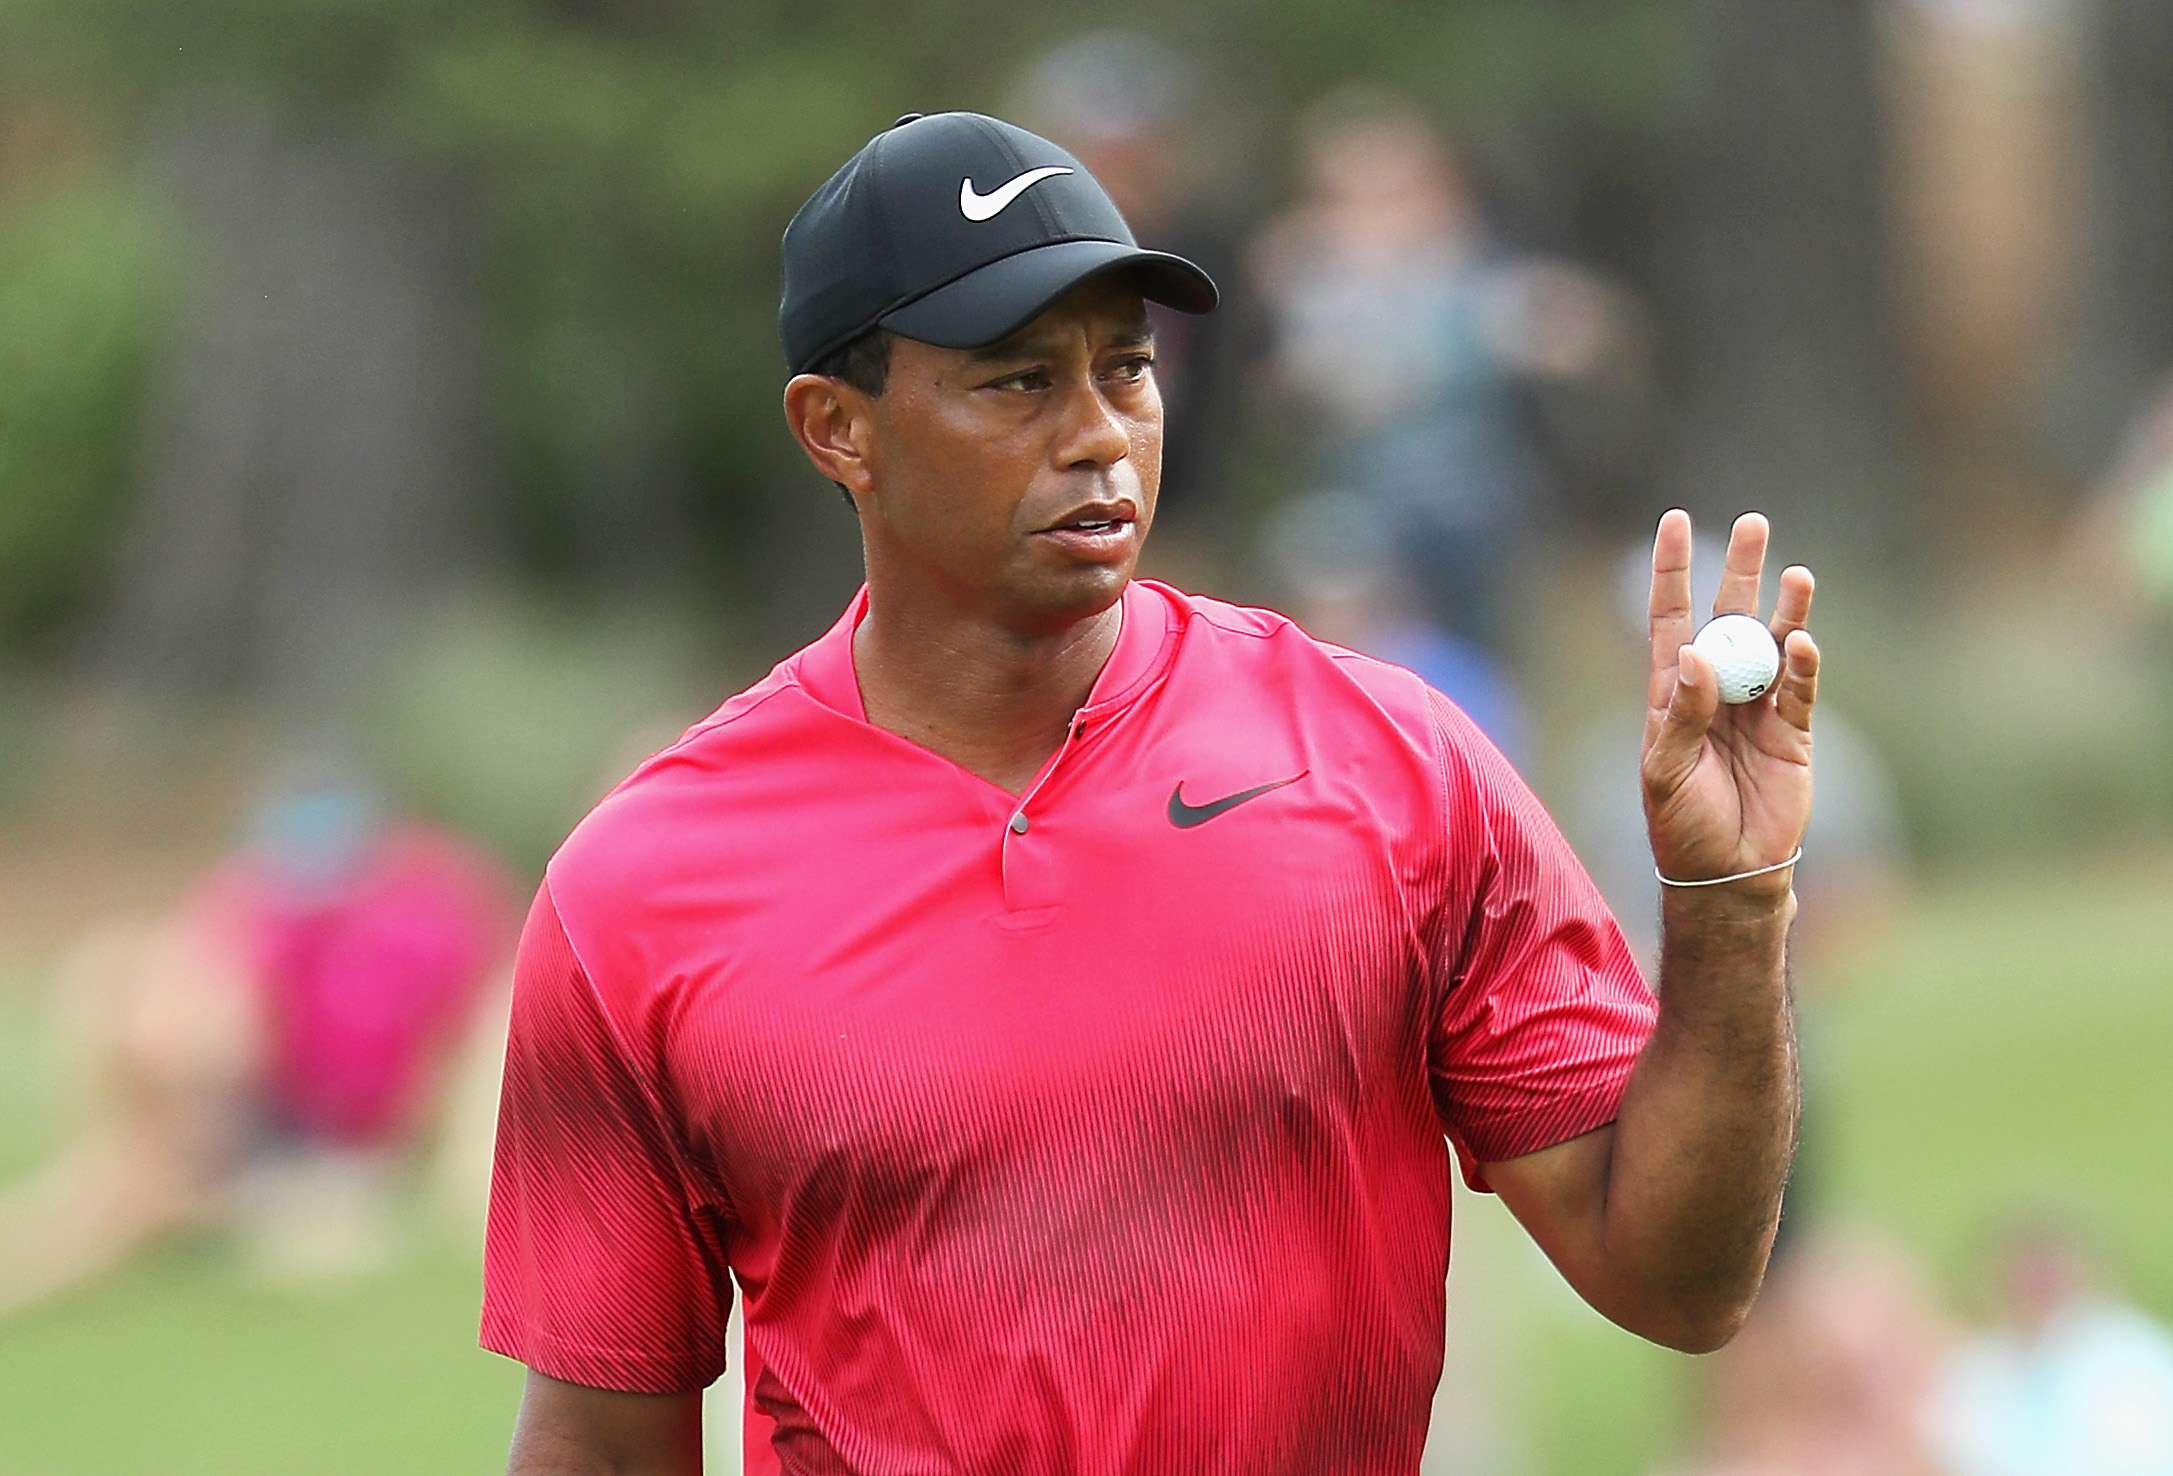 Tiger Woods: I'm not that far from winning golf tournaments